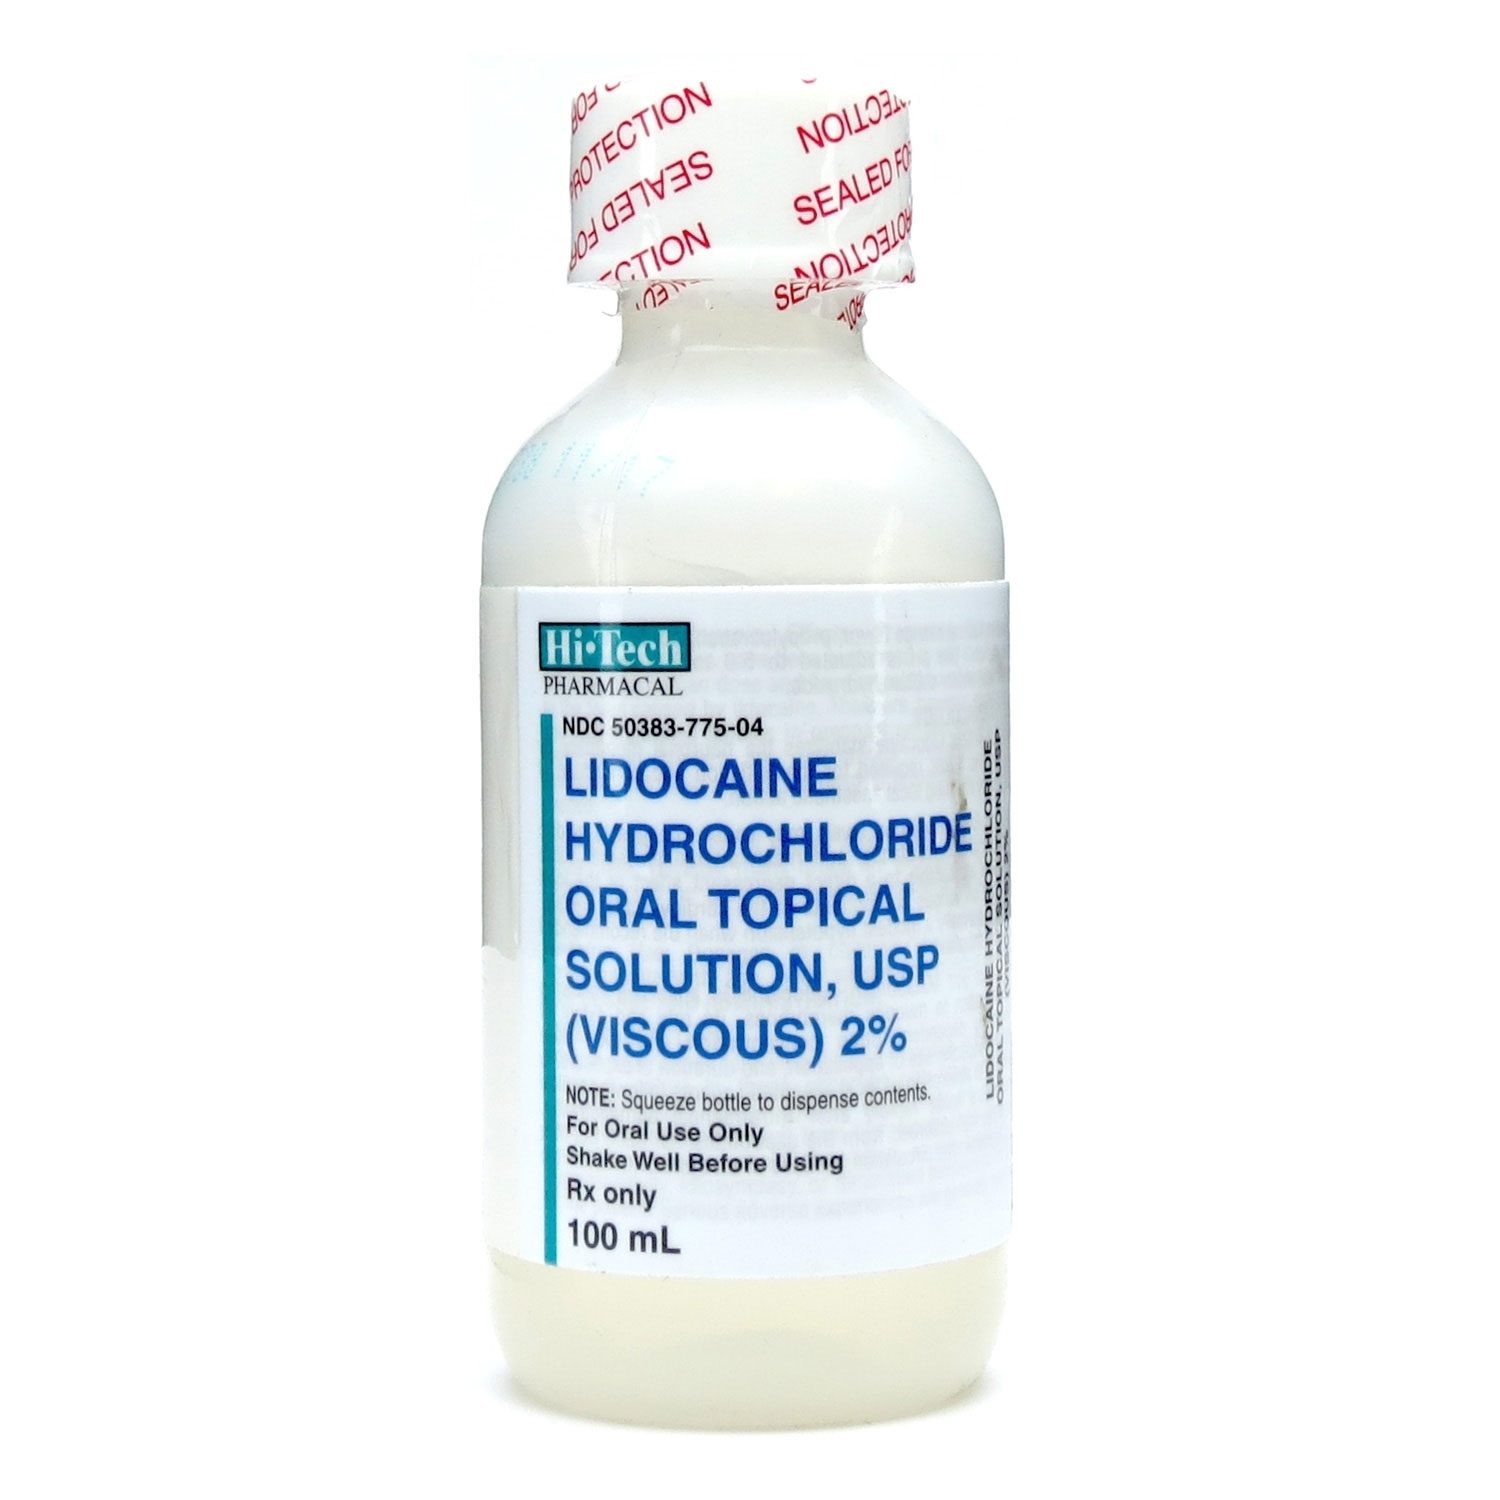 0009453_lidocaine-lidocaine-hydrochloride-oral-topical-solution-usp-2-20mgml-viscous-oral-solution-100ml-bot.jpeg